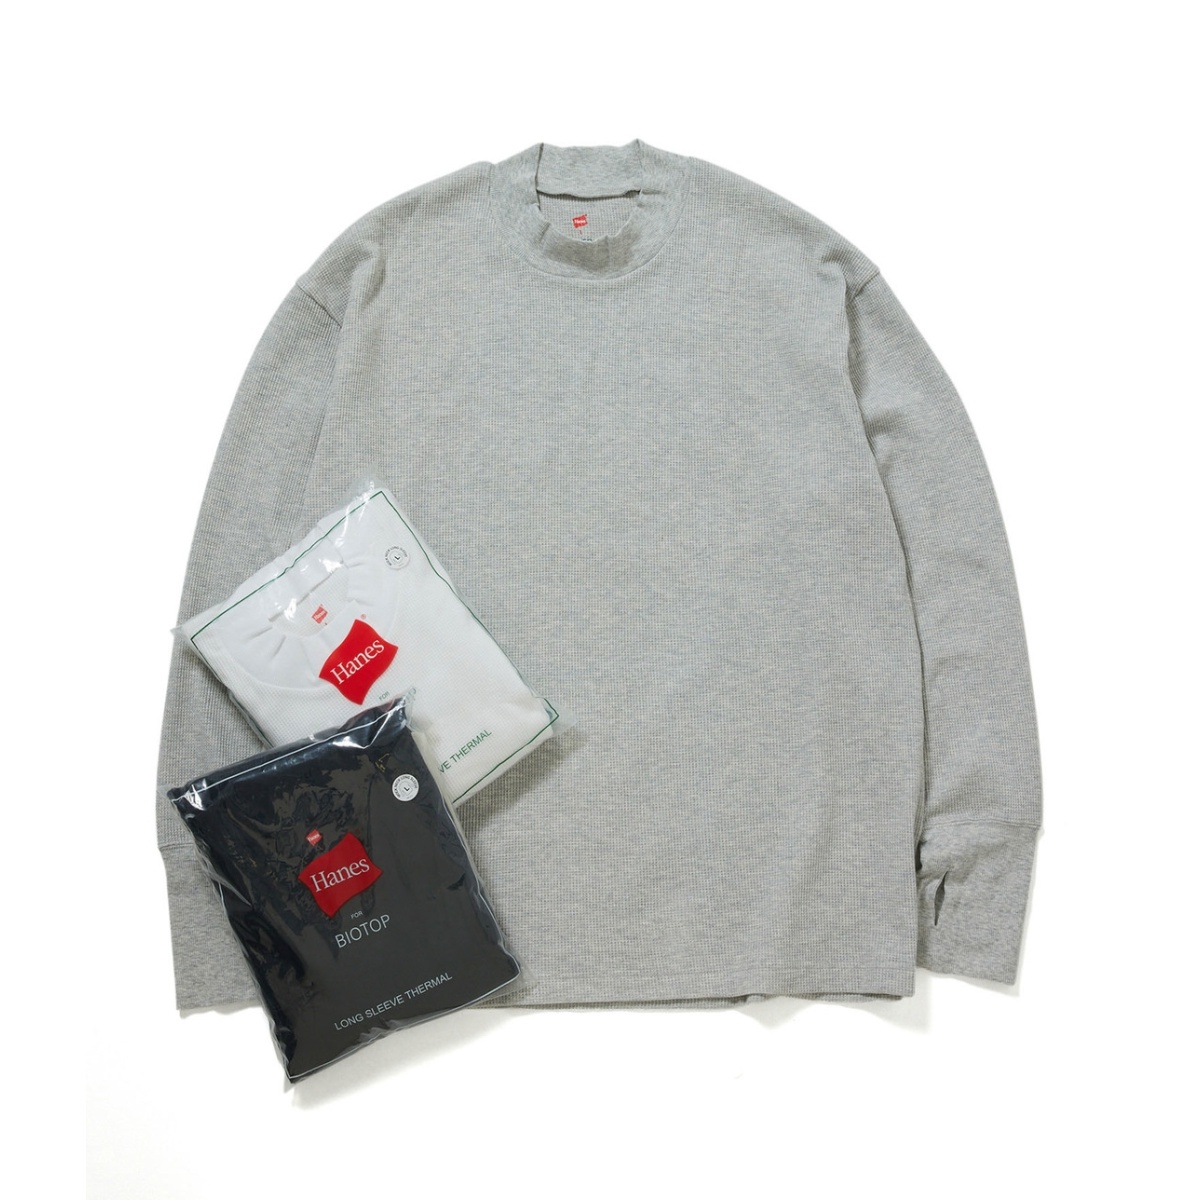 Hanes for BIOTOP】Cotton Stretch Thermal Mock Neck | アダムエロペ ...